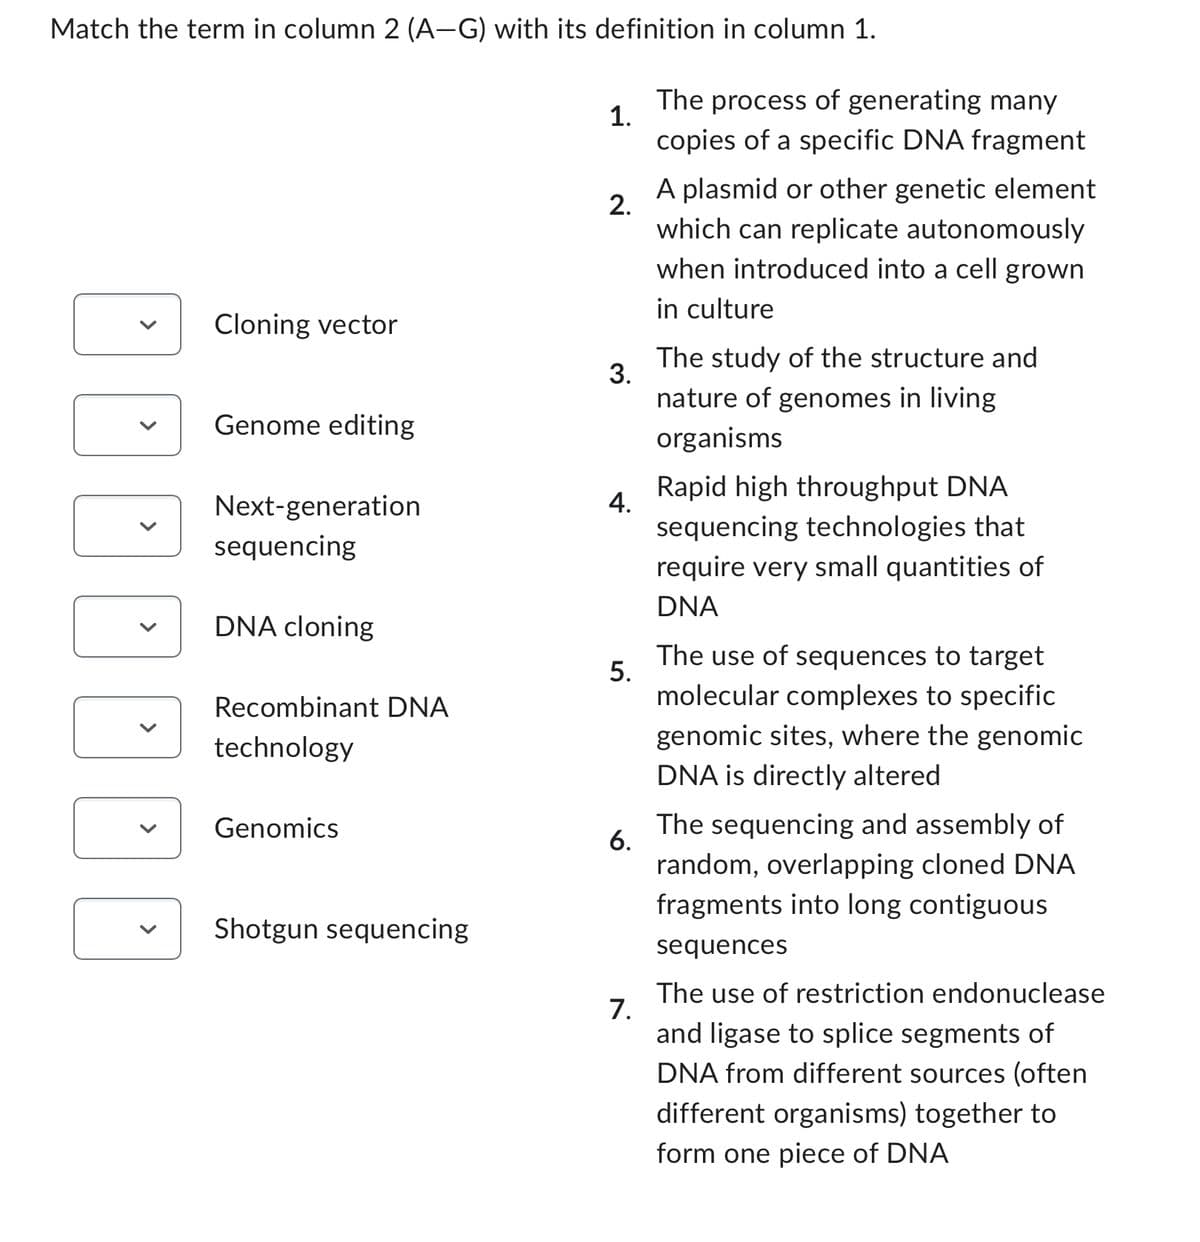 Match the term in column 2 (A-G) with its definition in column 1.
ODDEE
V
Cloning vector
Genome editing
Next-generation
sequencing
DNA cloning
Recombinant DNA
technology
Genomics
Shotgun sequencing
1.
2.
3.
4.
5.
6.
7.
The process of generating many
copies of a specific DNA fragment
A plasmid or other genetic element
which can replicate autonomously
when introduced into a cell grown
in culture
The study of the structure and
nature of genomes in living
organisms
Rapid high throughput DNA
sequencing technologies that
require very small quantities of
DNA
The use of sequences to target
molecular complexes to specific
genomic sites, where the genomic
DNA is directly altered
The sequencing and assembly of
random, overlapping cloned DNA
fragments into long contiguous
sequences
The use of restriction endonuclease
and ligase to splice segments of
DNA from different sources (often
different organisms) together to
form one piece of DNA